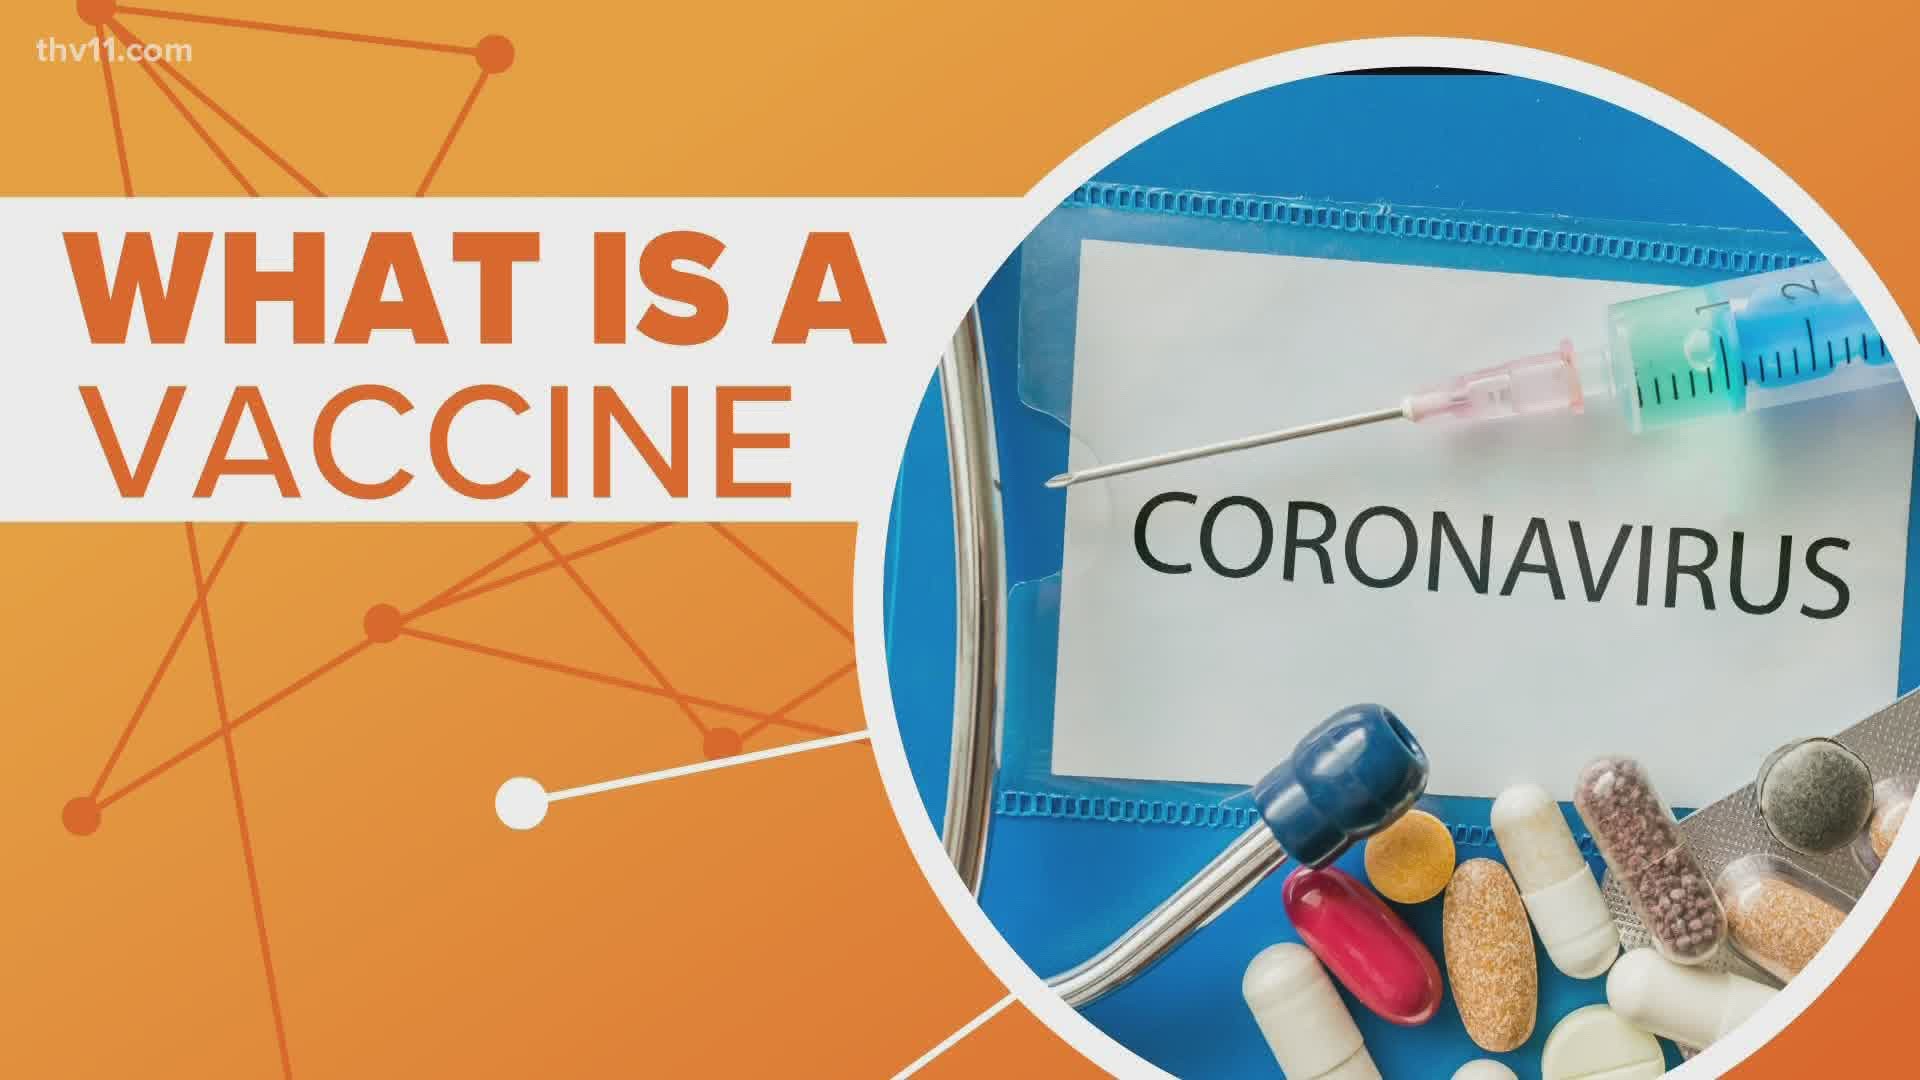 There's been a lot of talk about a COVID-19 vaccine and how soon it could be available to the public, and see what it takes to produce one